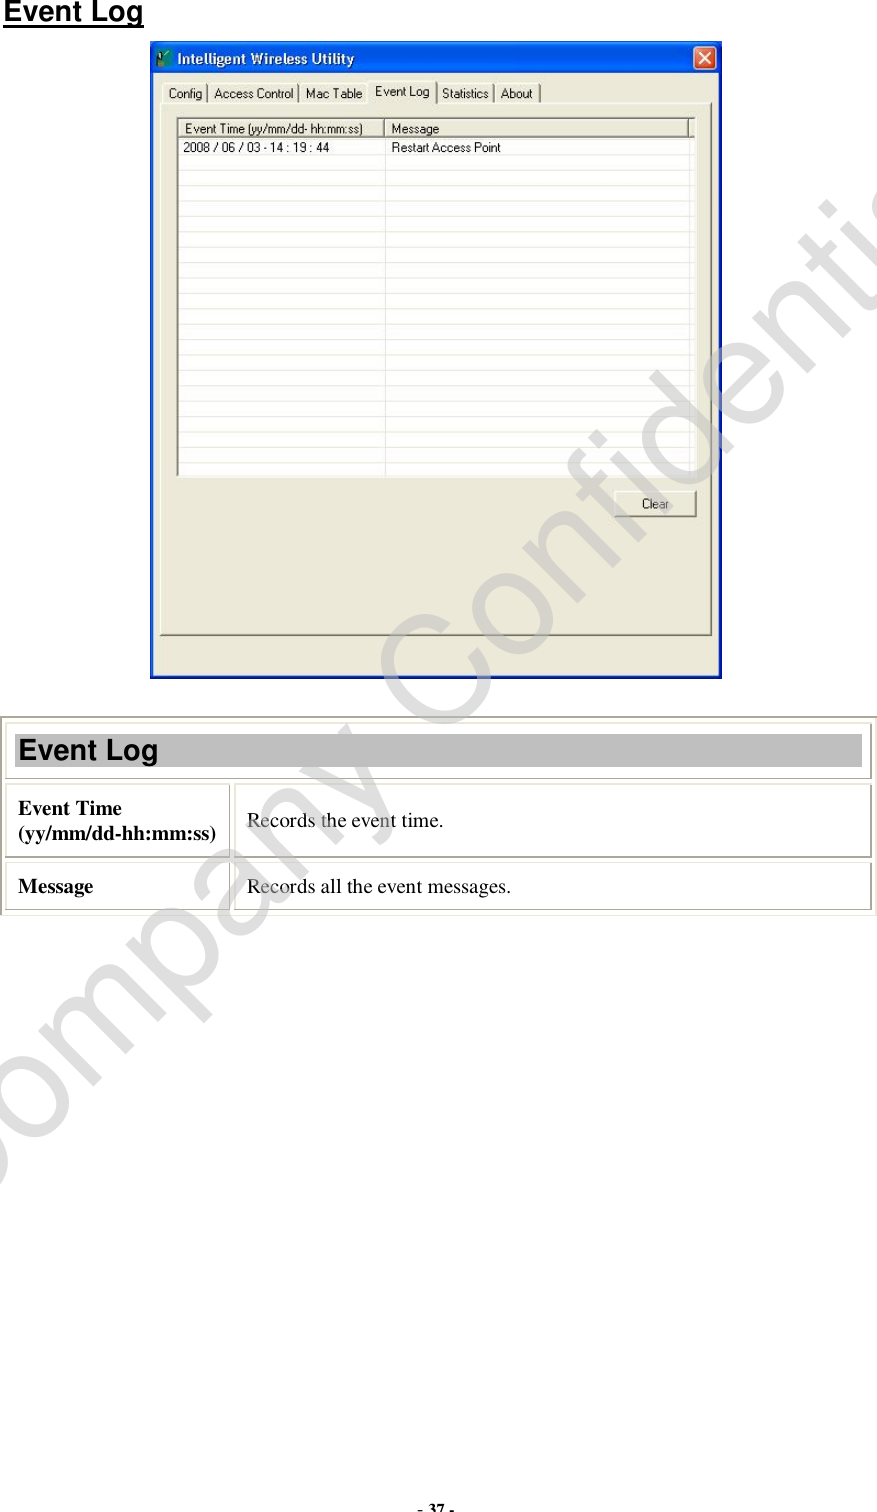  - 37 -  Event Log   Event Log Event Time (yy/mm/dd-hh:mm:ss) Records the event time. Message  Records all the event messages. Company Confidential